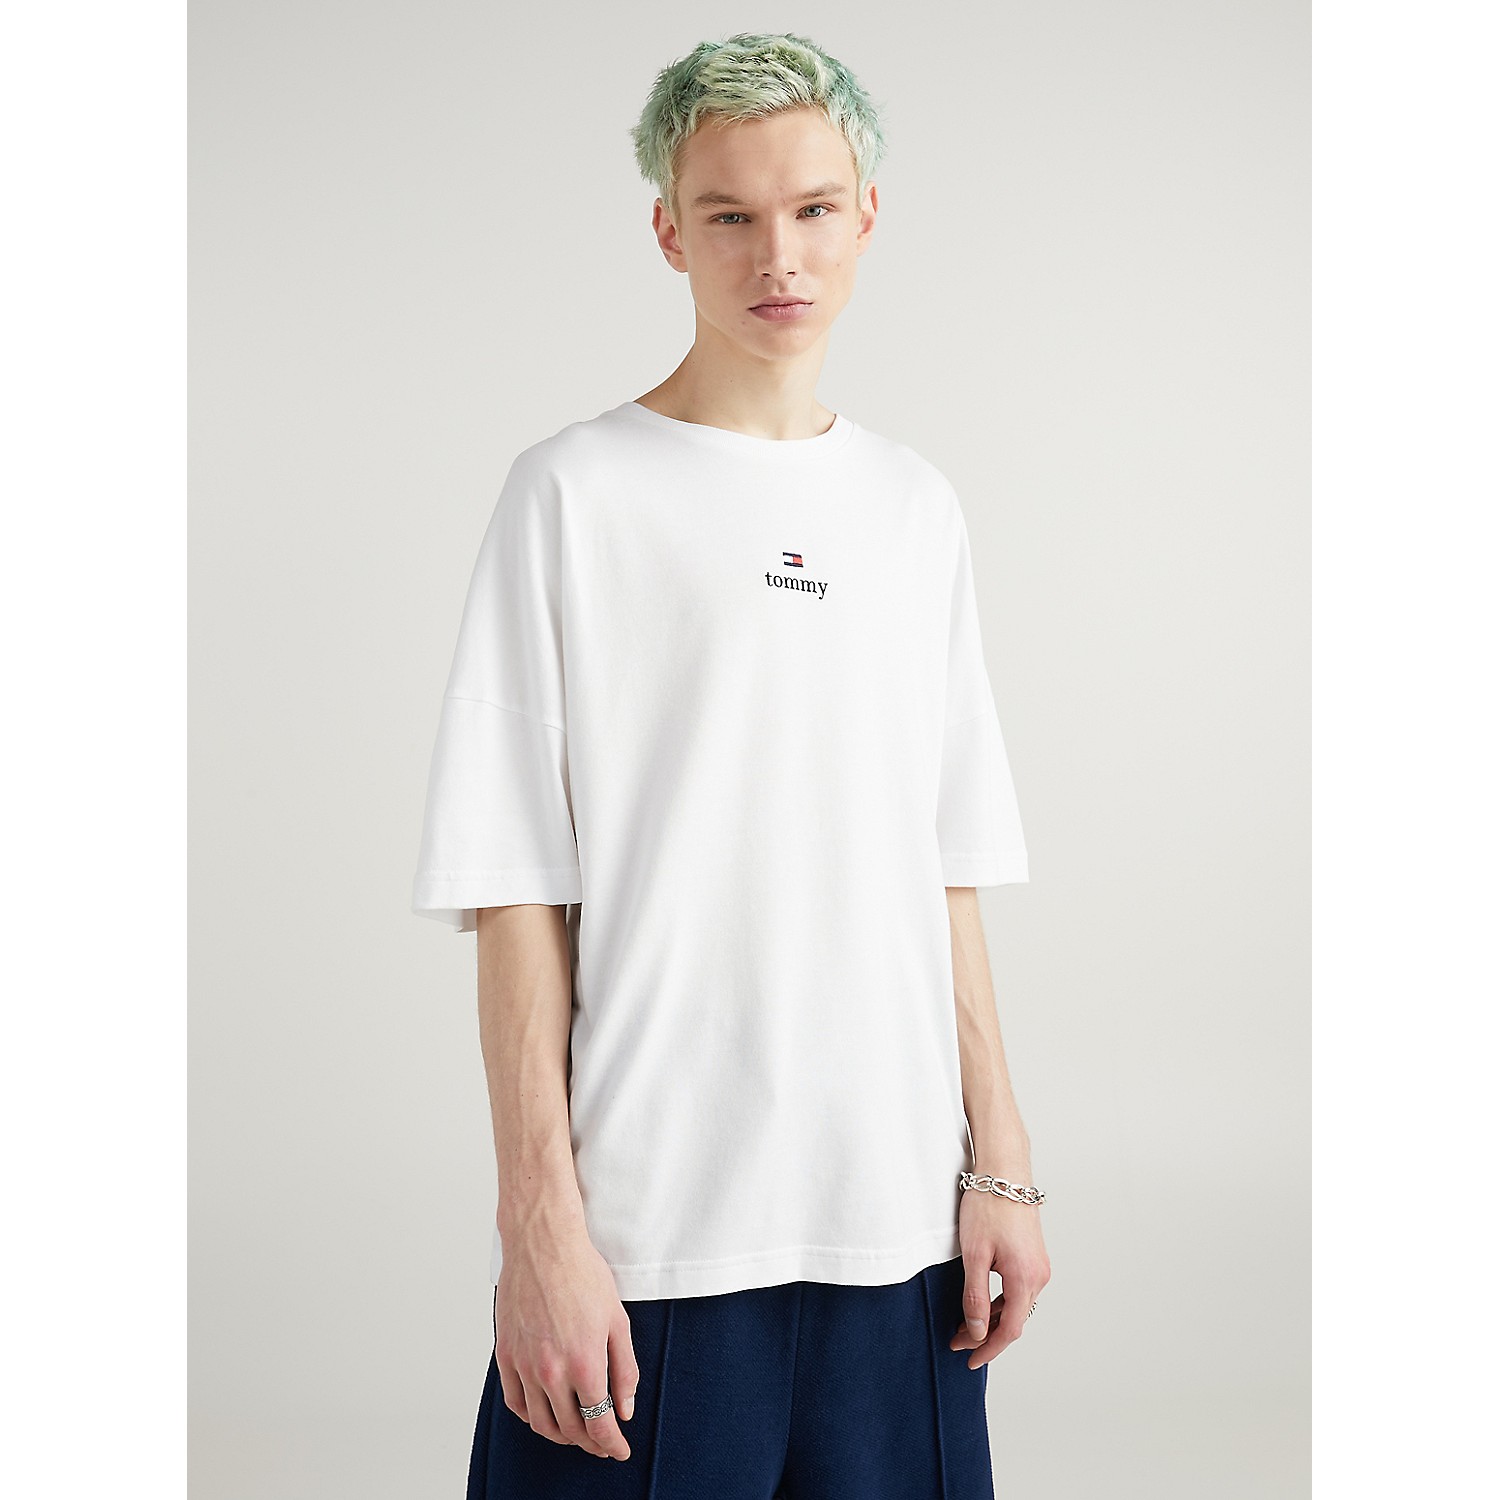 TOMMY JEANS Tommy Collection Logo T-Shirt